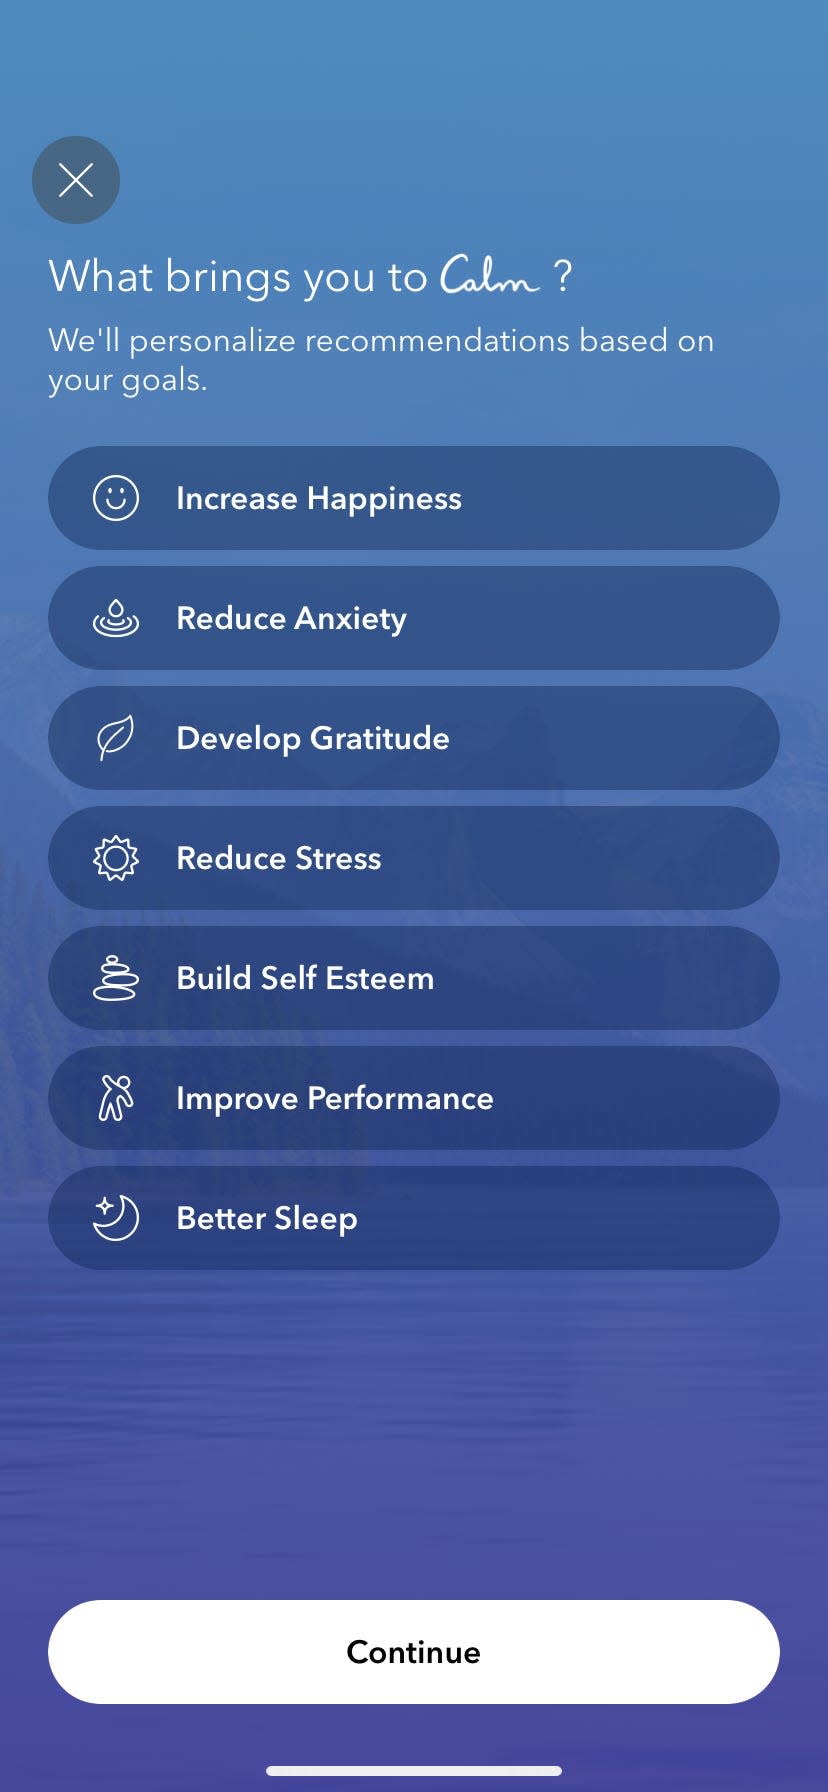 a blue screen and the question "What brings you to Calm?" in a screenshot of the meditation app Calm